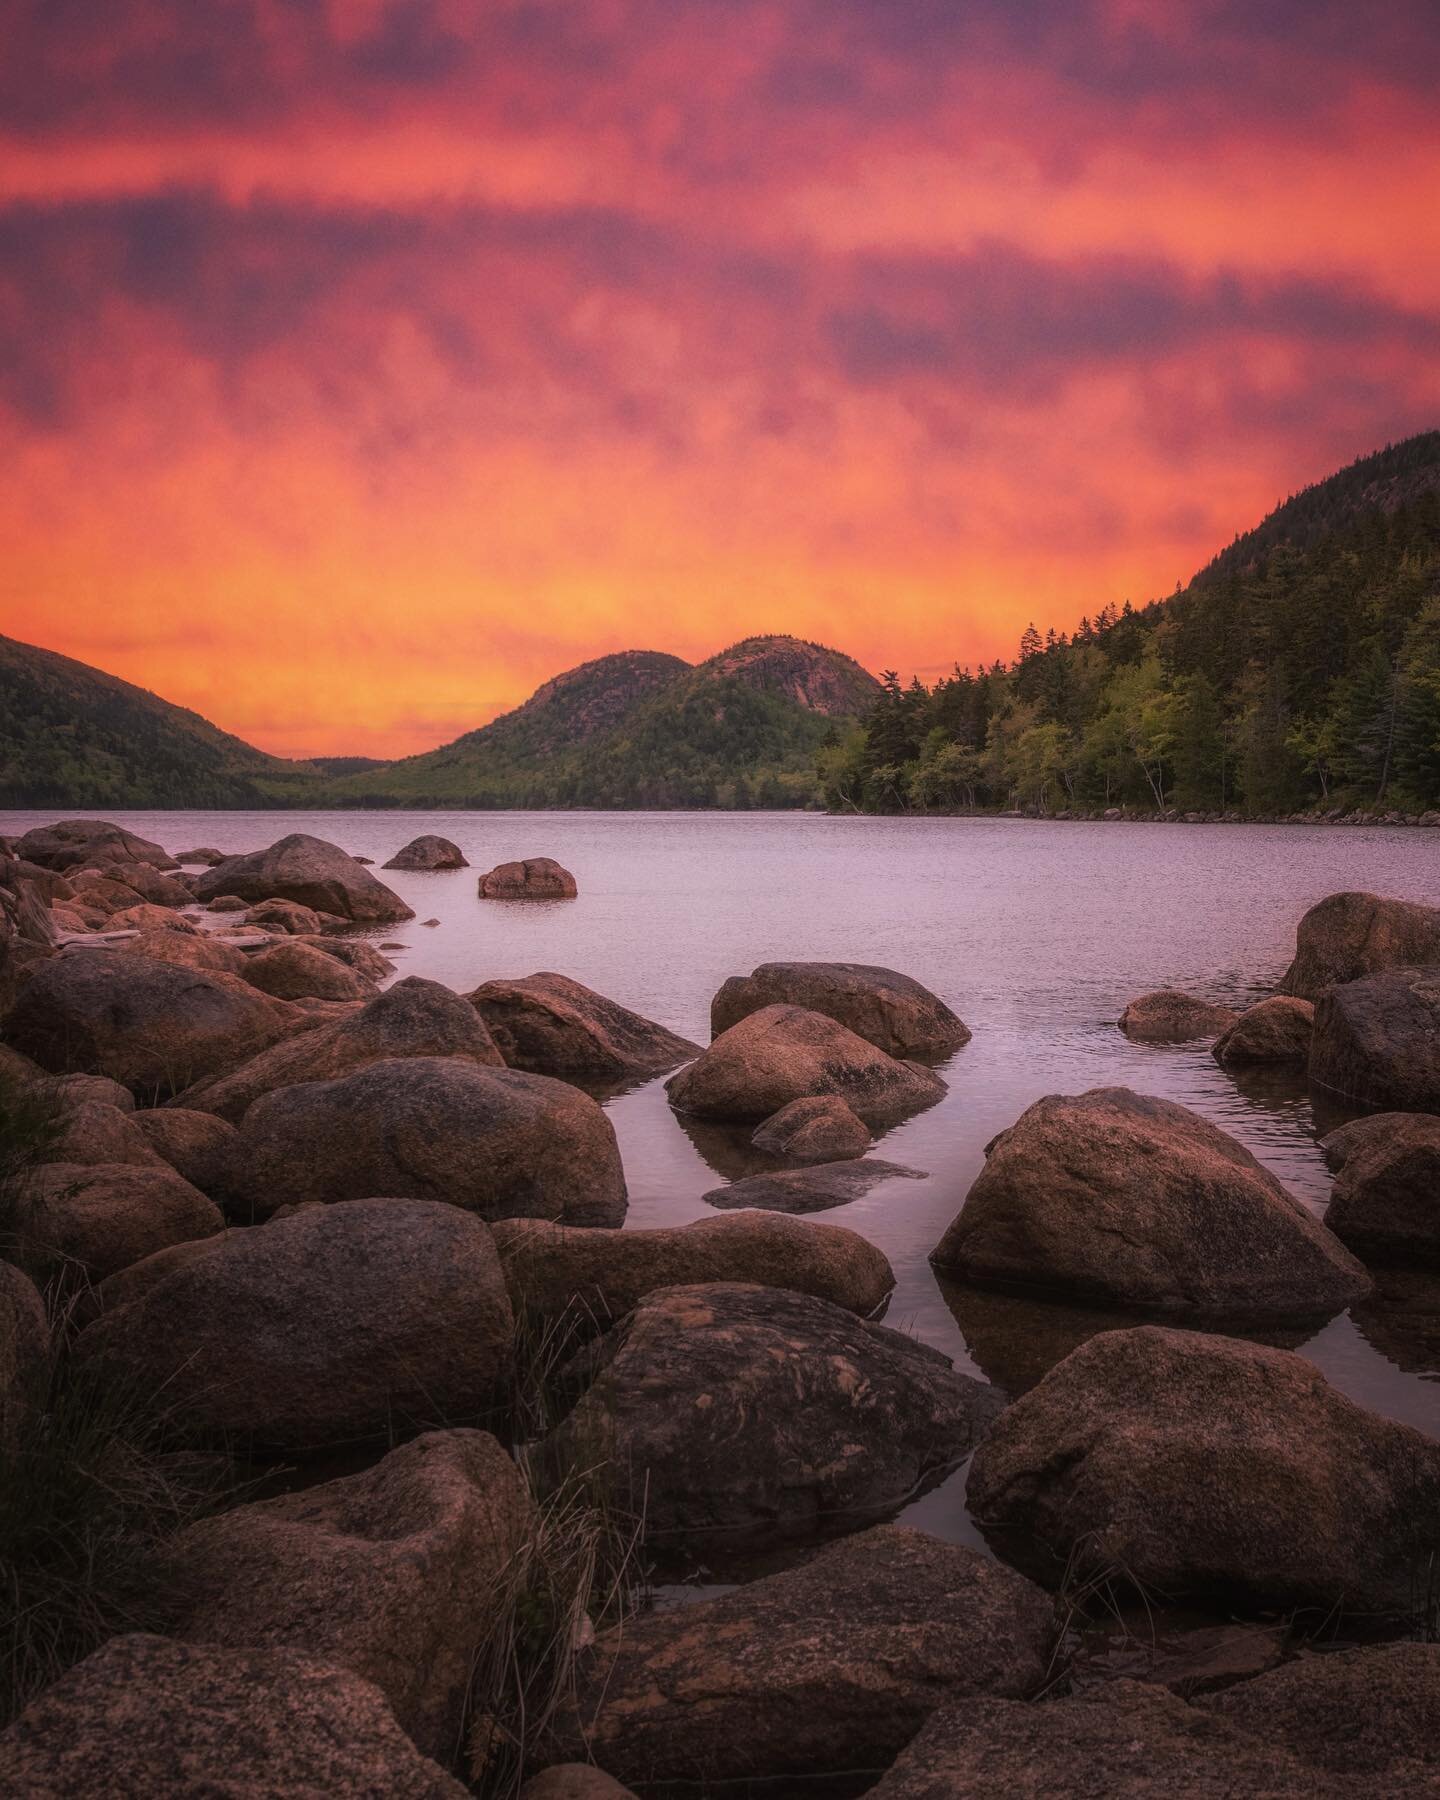 Once upon a sunset 🌞 in Acadia National Park 😍 Boulders to Bubbles with Jordan Pond in-between 🧡 The North Bubble, to the left has the highest elevation at 872 feet. The South Bubble follows at 766 feet.